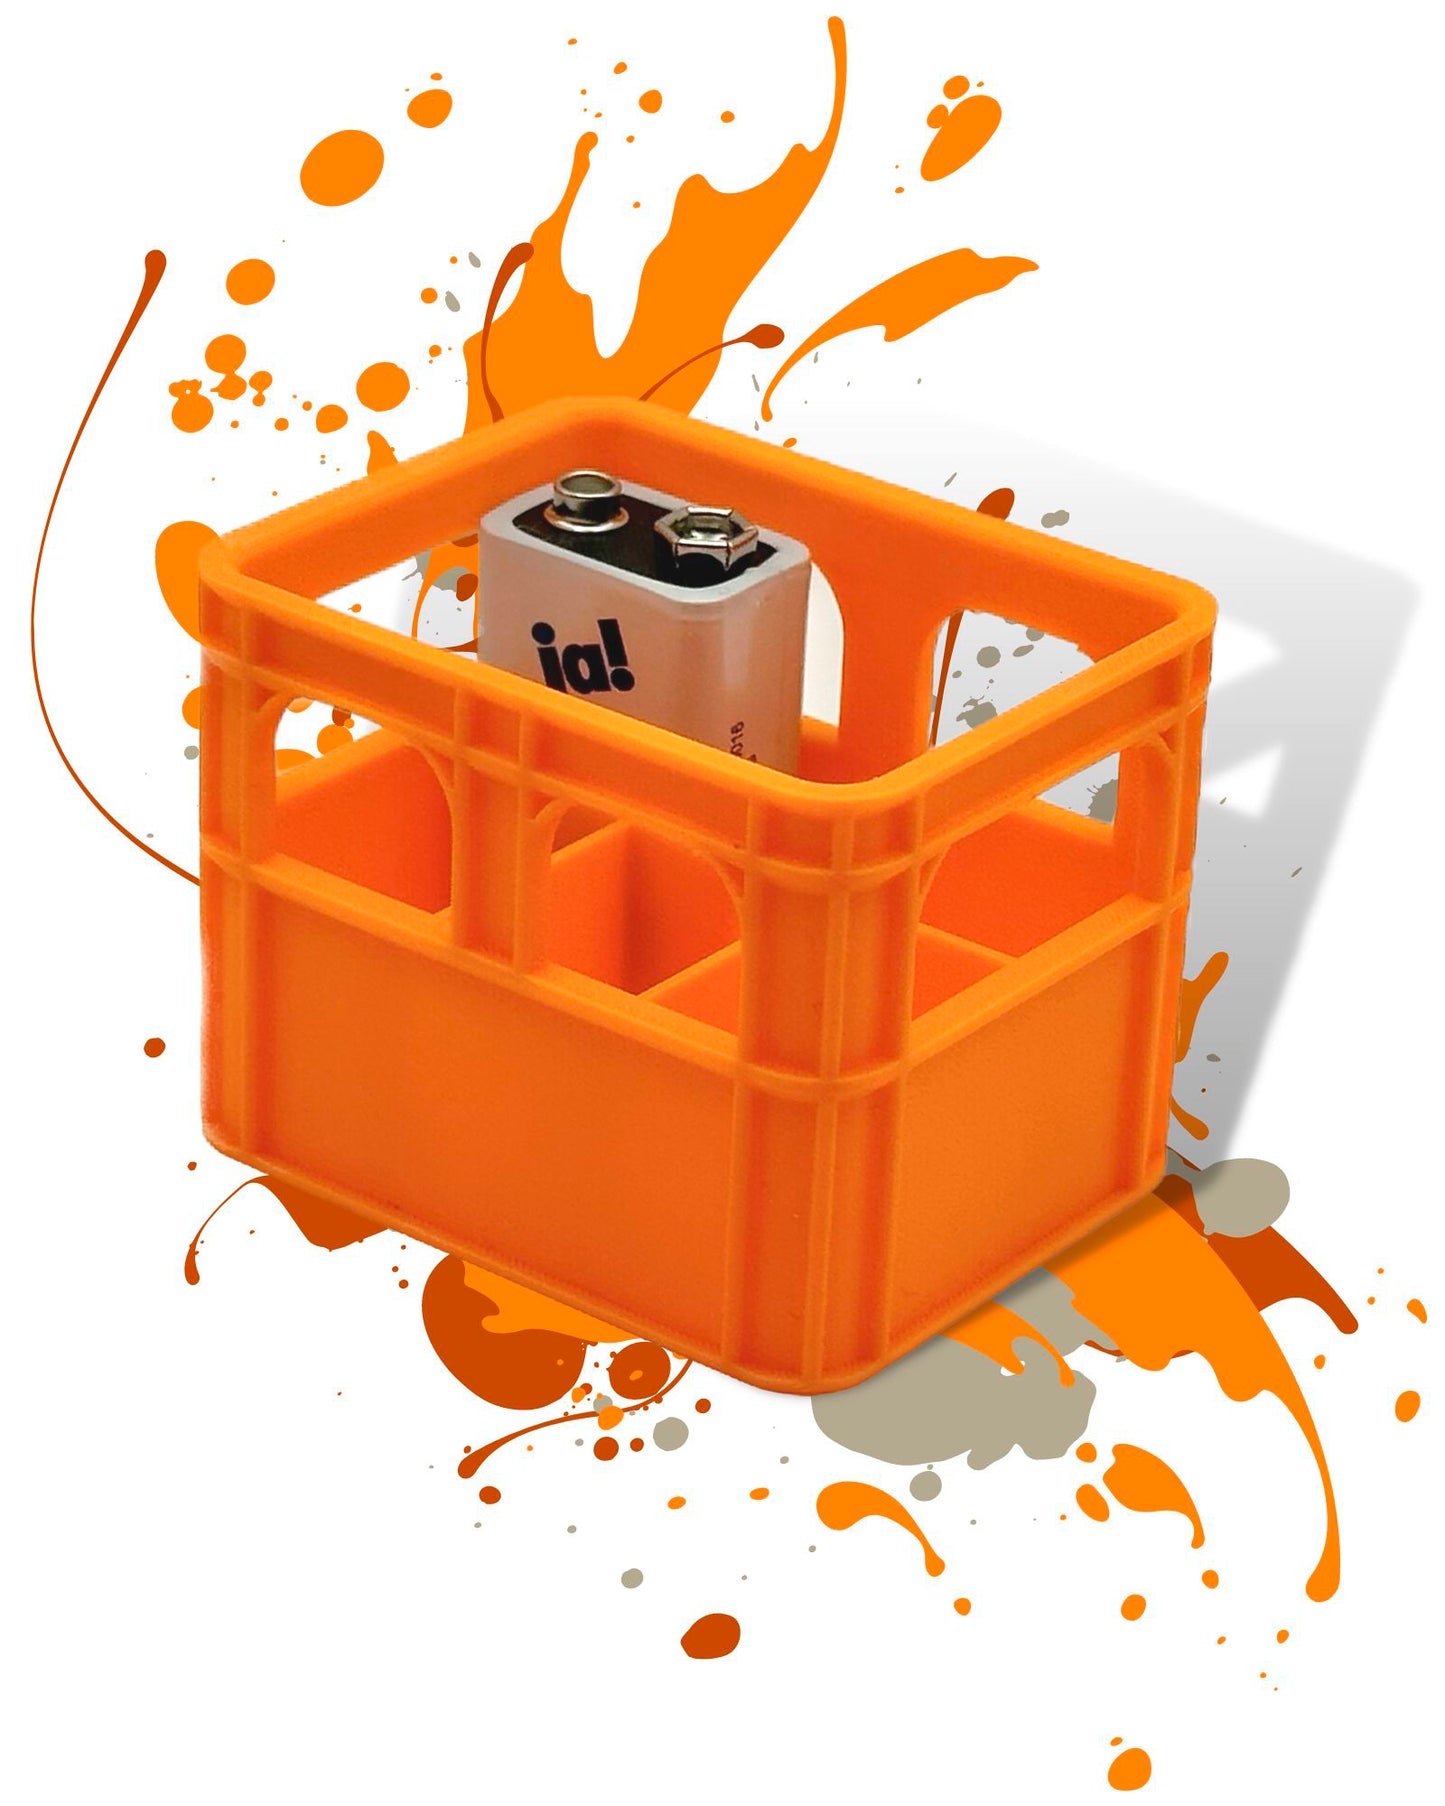 Battery Beer crate Beer crate Battery crate Battery crate Battery box Mini crate Mini box for storing AA, AAA, 9V batteries, empty crate - 3D printed